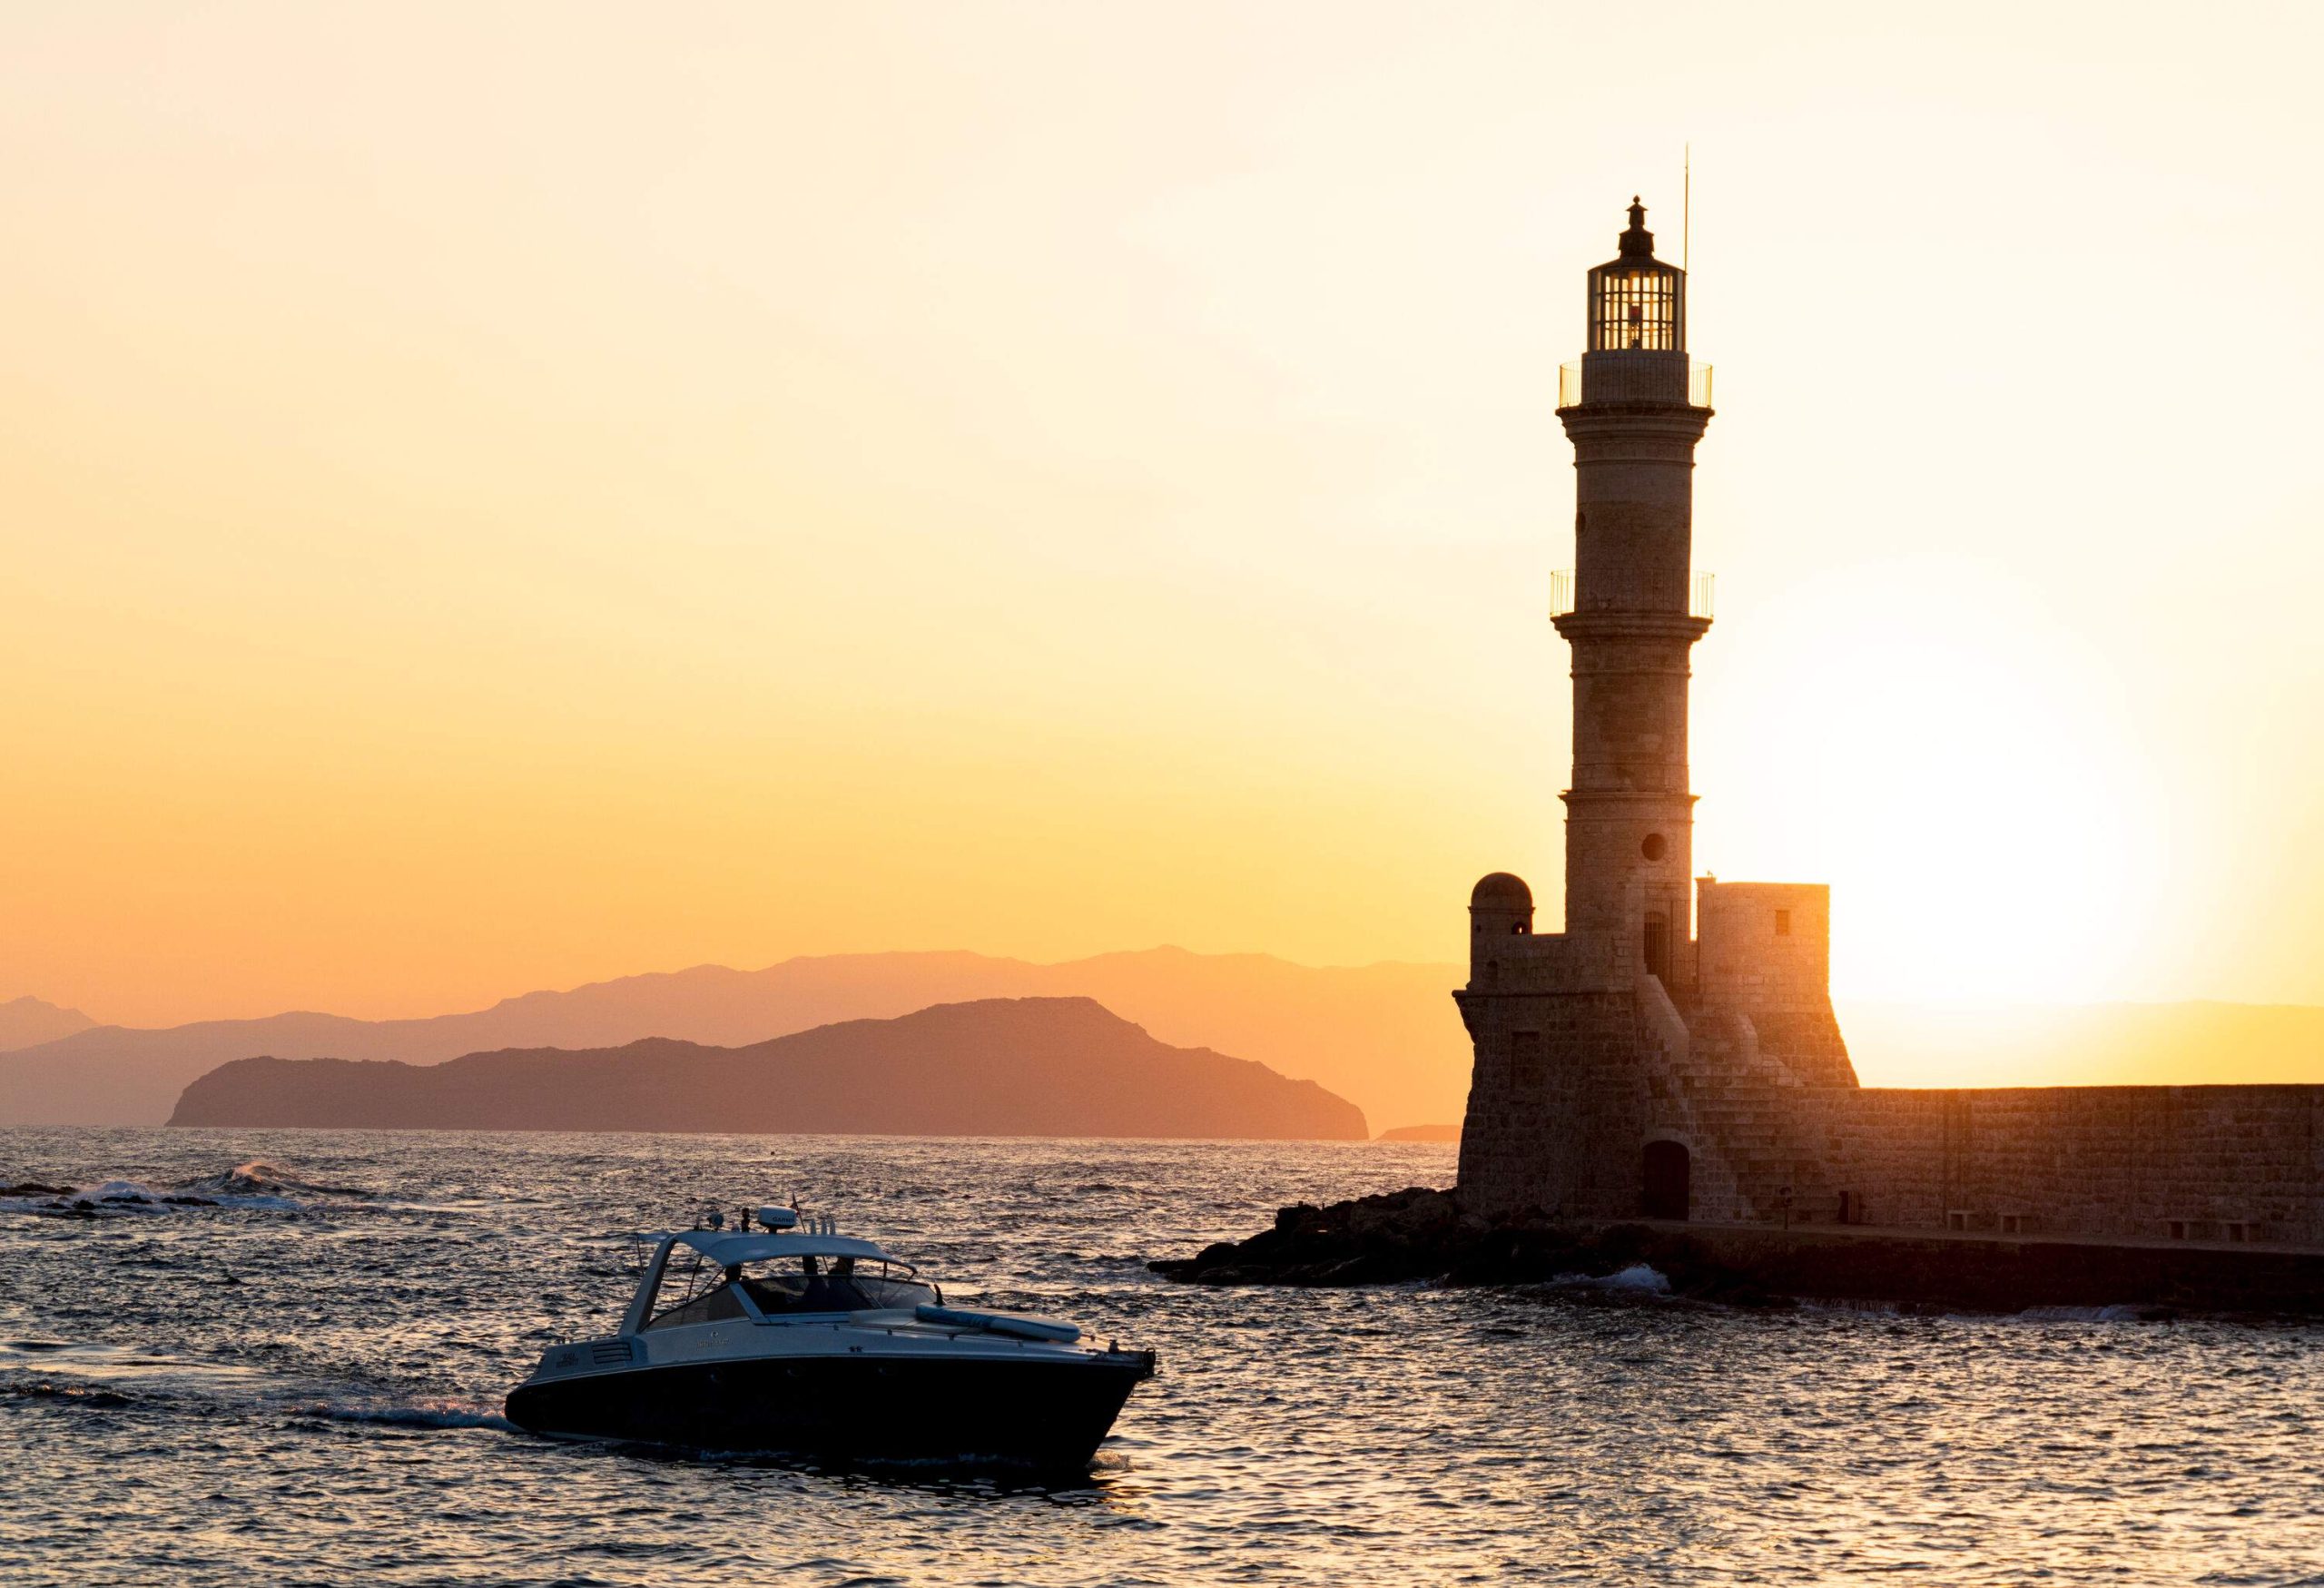 Silhouette of a lighthouse near a cruising yacht against the backdrop of the glaring sun.